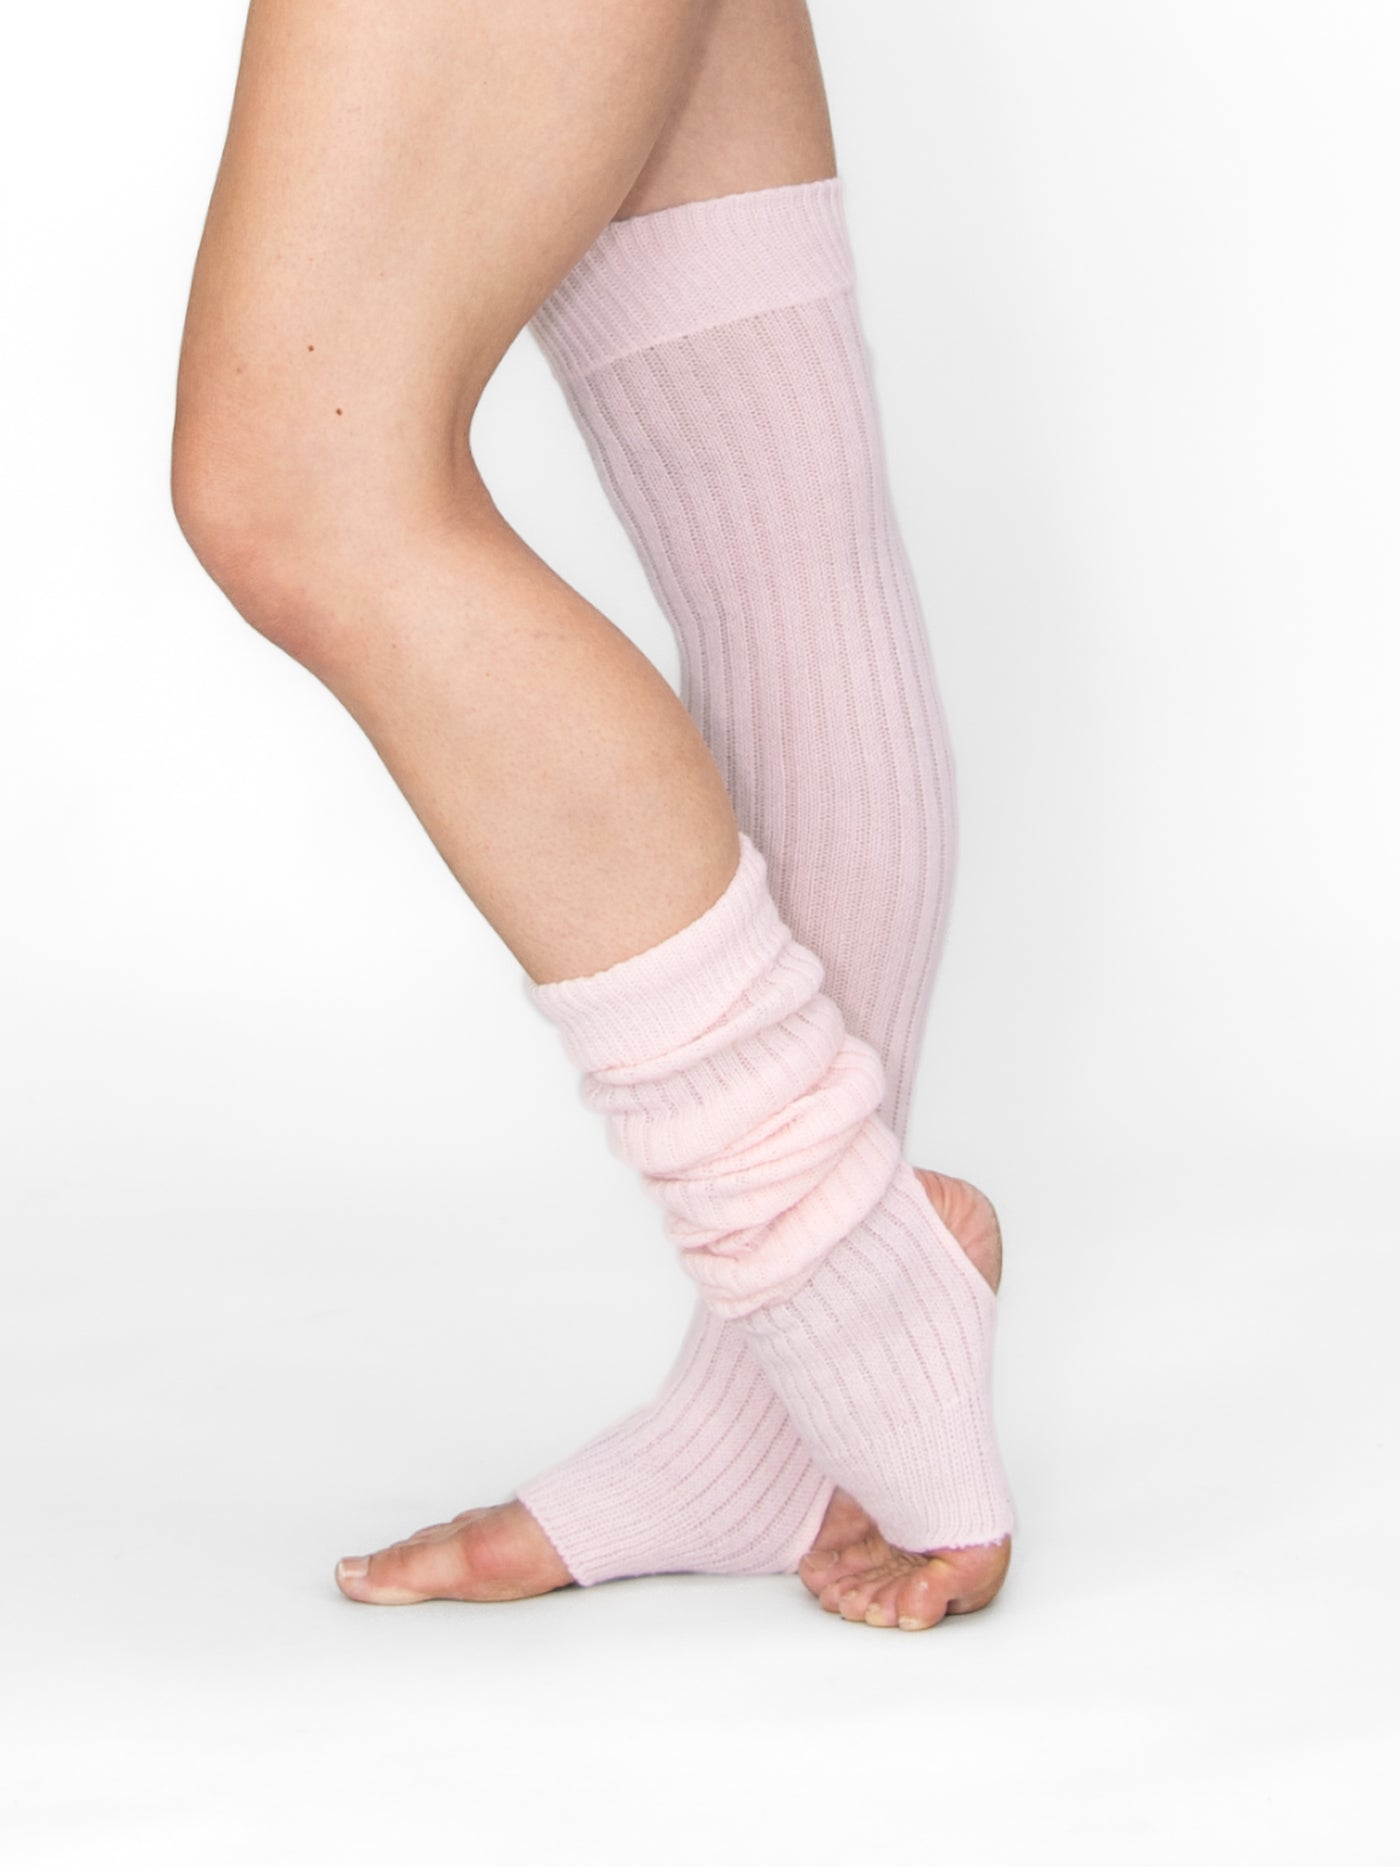 Body Wrappers 48” Extra-Long Stirrup Thigh Warmers